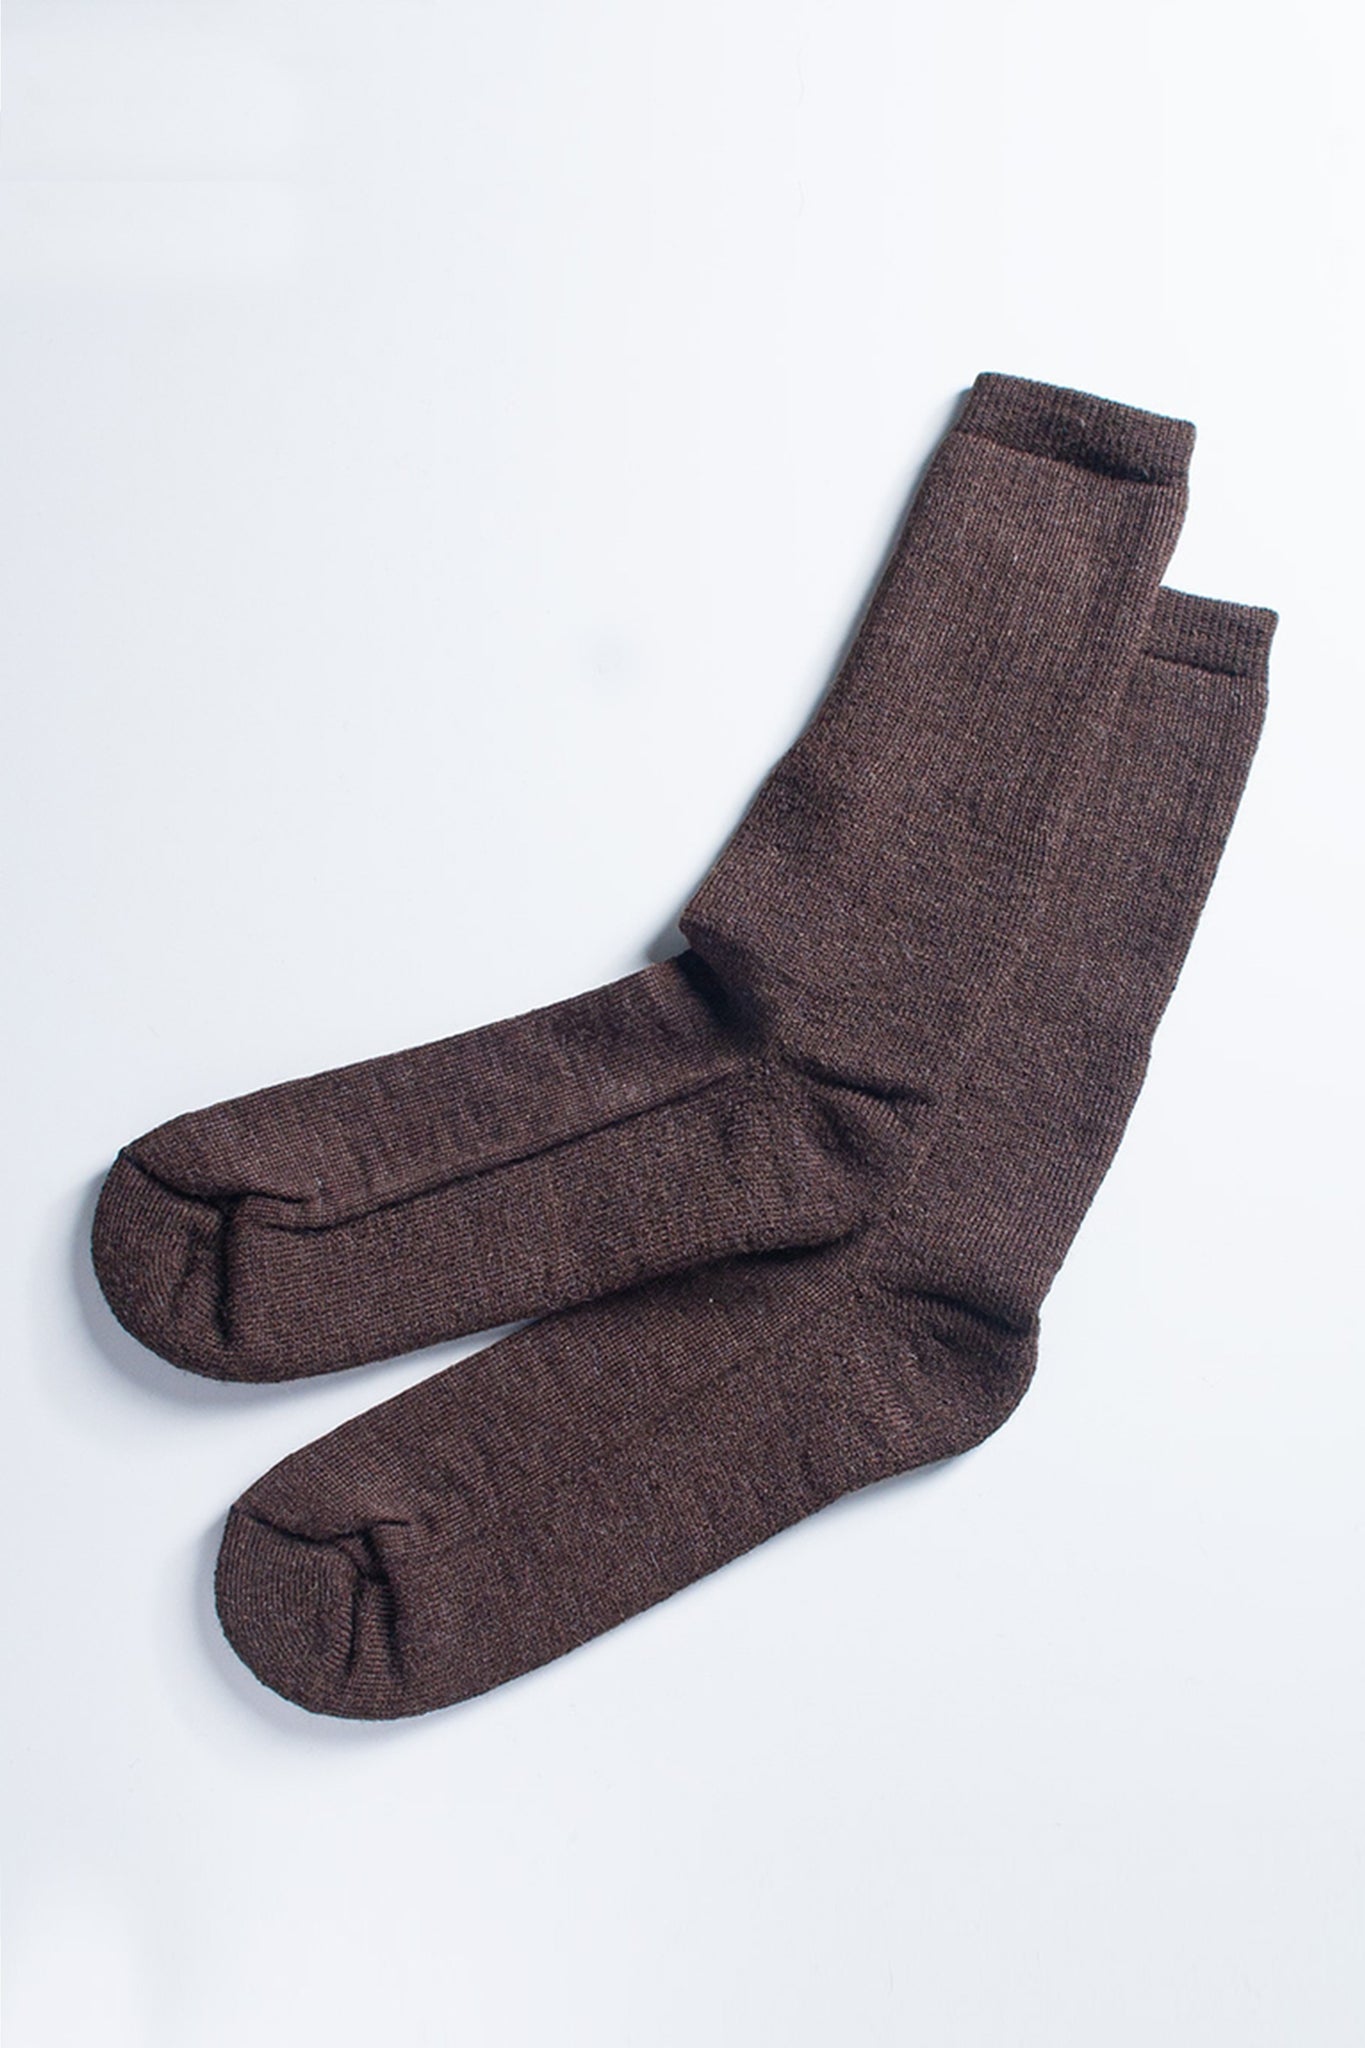 THE INOUE BROTHERS..."MOUNTAIN SOCKS / BROWN"